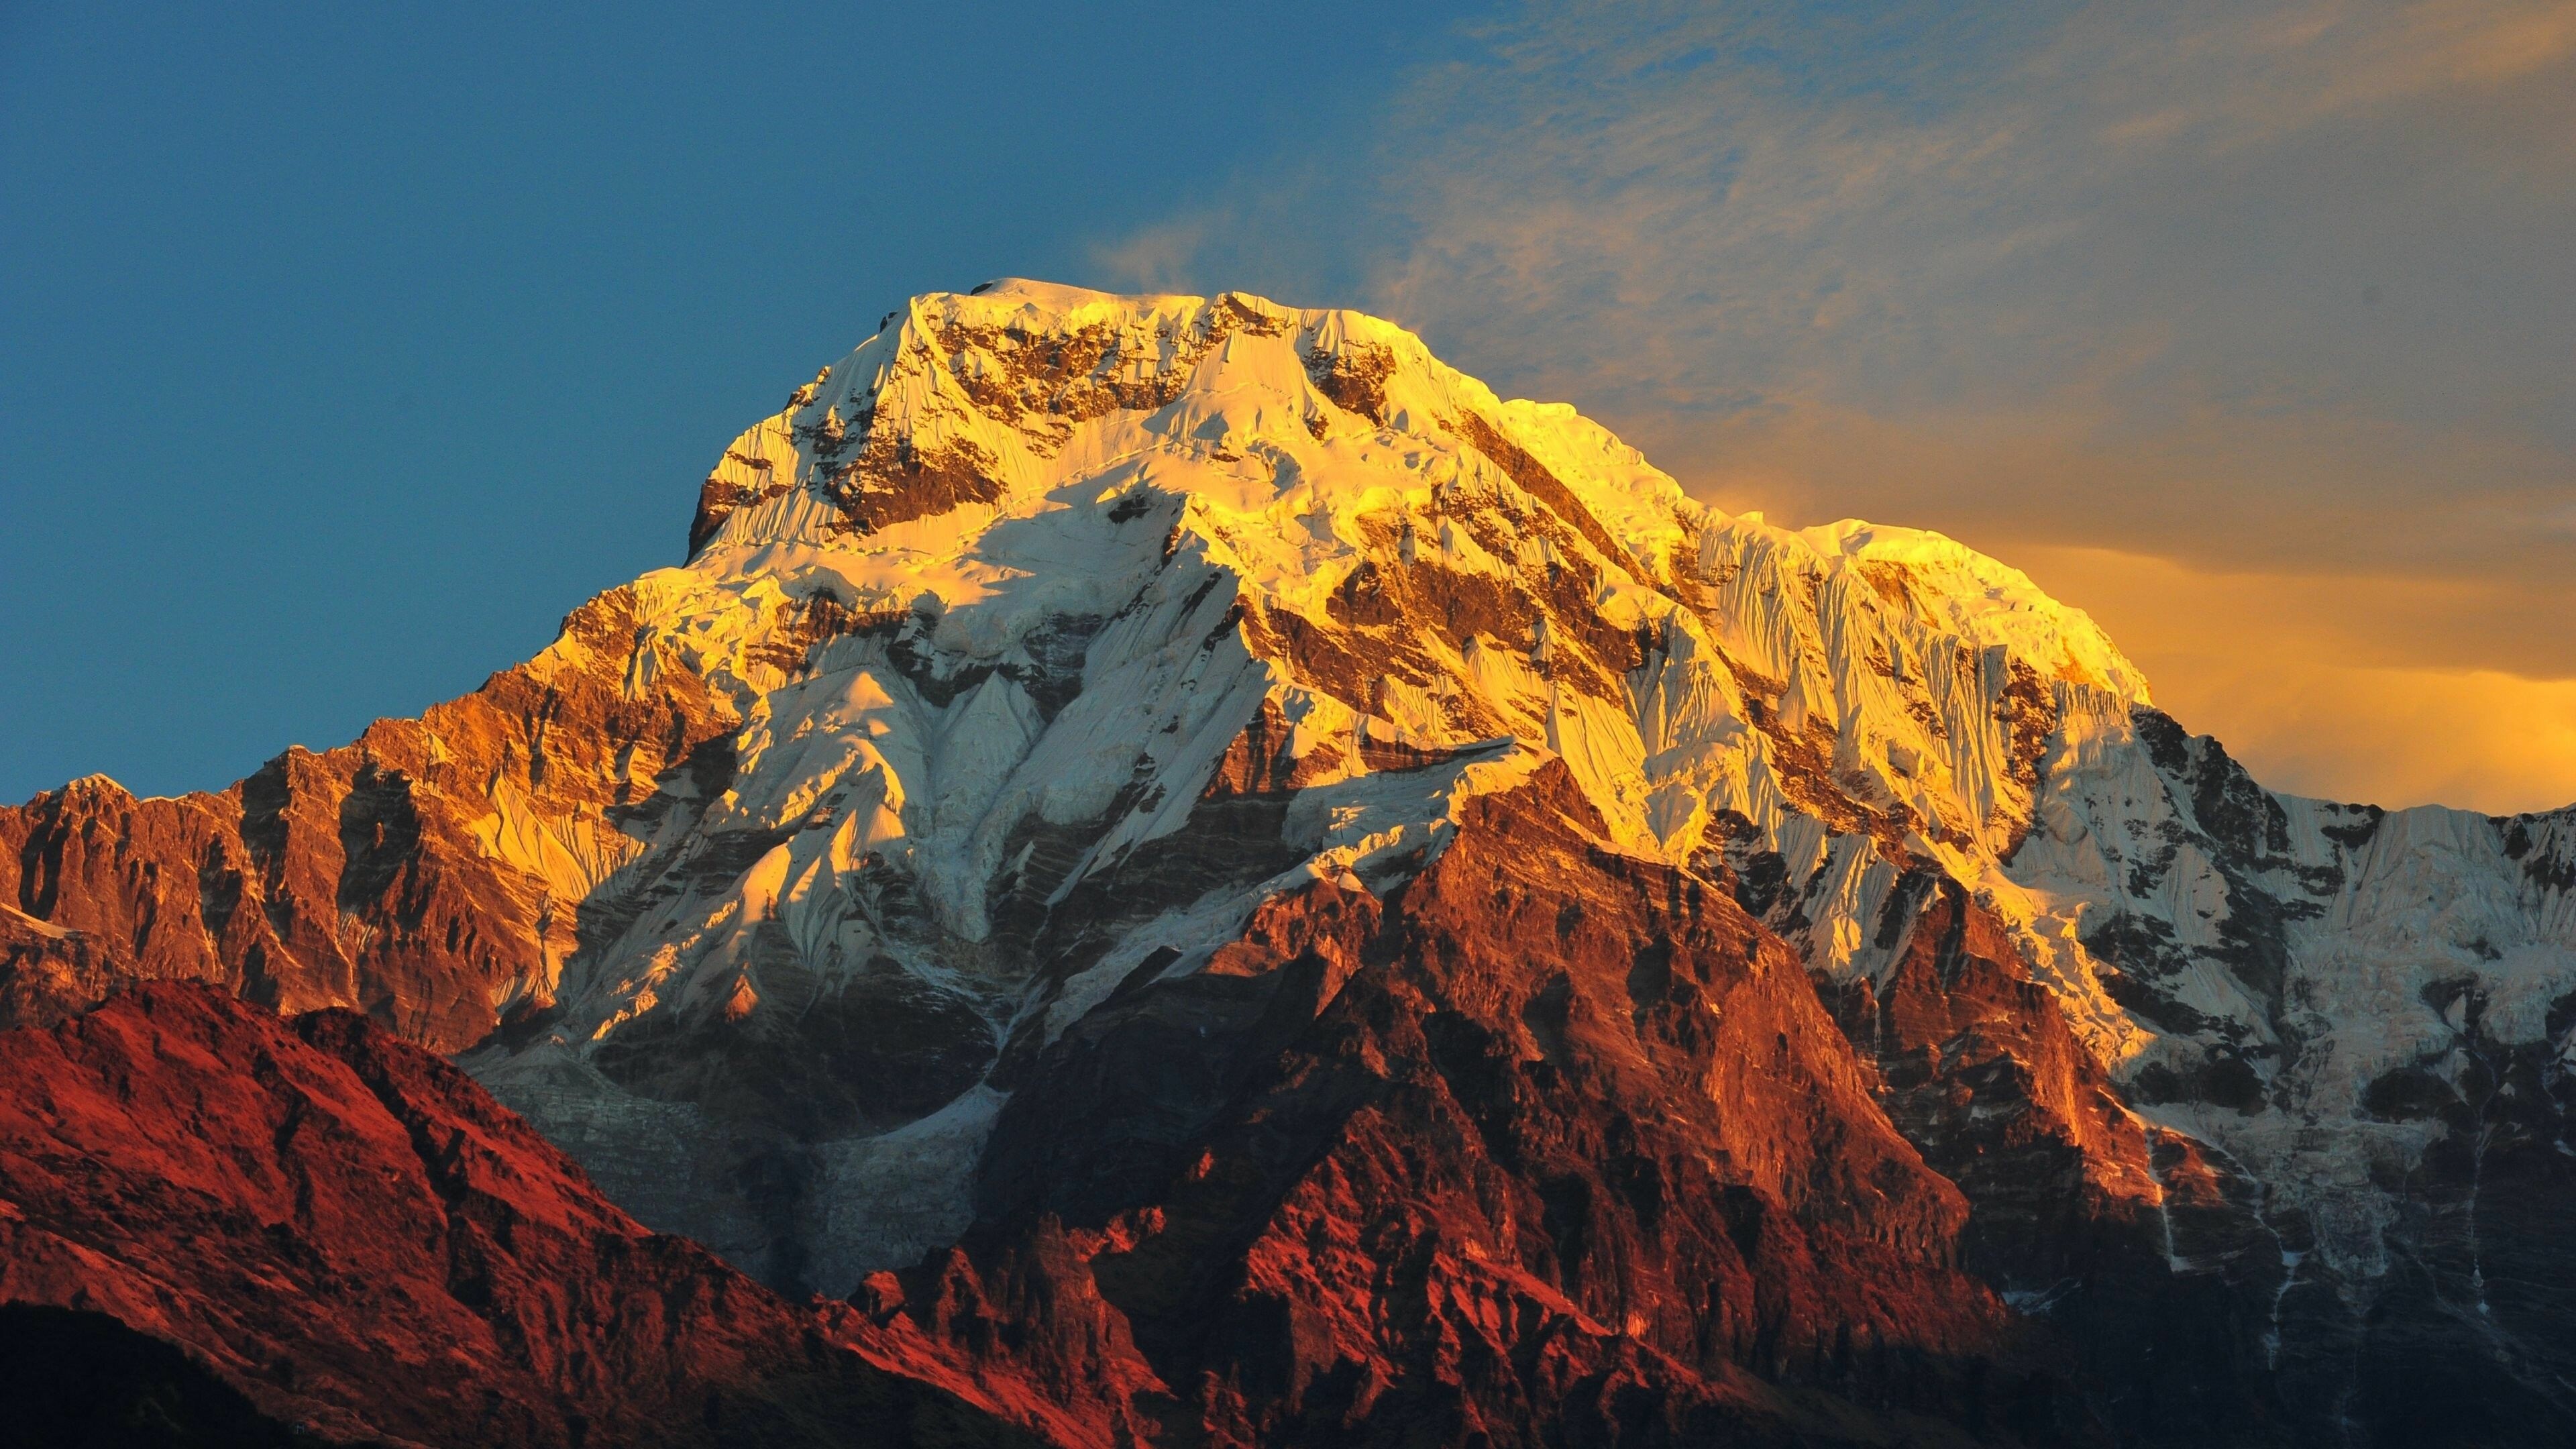 Mountain: Nature, Mount Everest in the Himalayas of Asia is the highest summit on Earth. 3840x2160 4K Wallpaper.